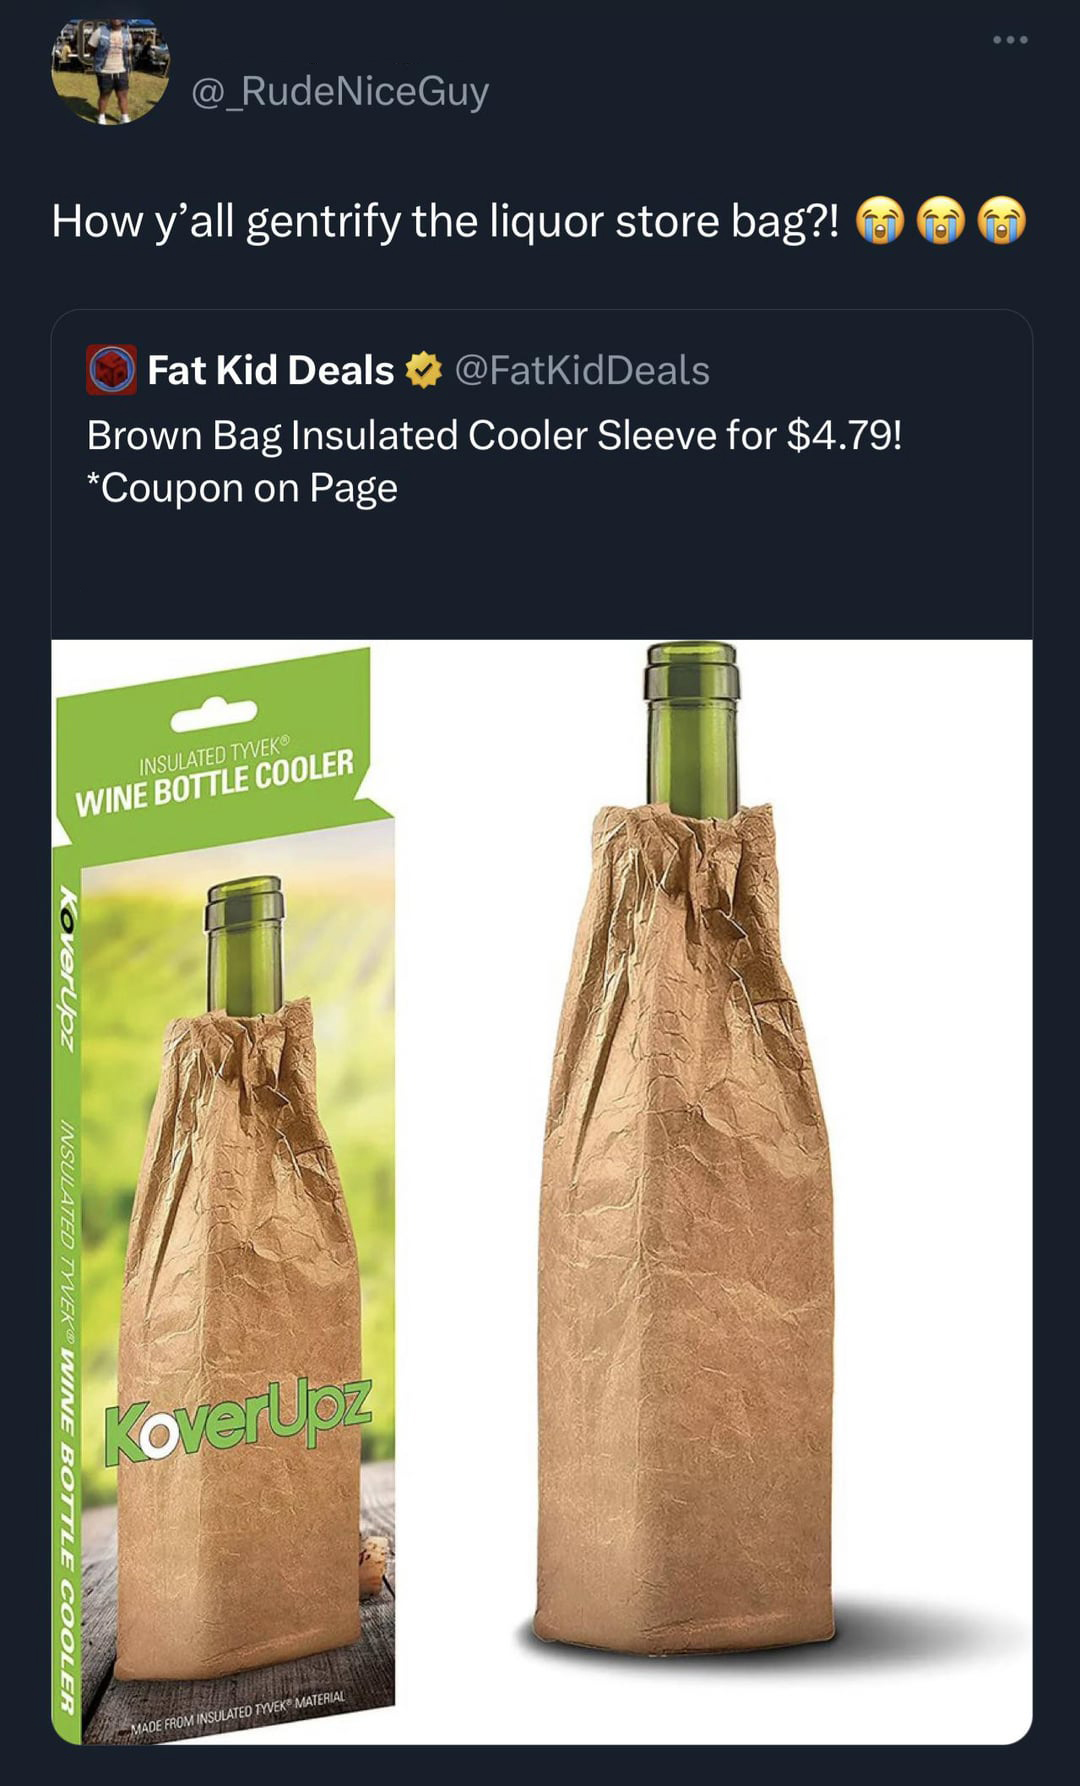 funny tweets and memes - glass bottle - How y'all gentrify the liquor store bag?! Fat Kid Deals Brown Bag Insulated Cooler Sleeve for $4.79! Coupon on Page Nonstant Wine Bottle Cooler KoverUbz winds